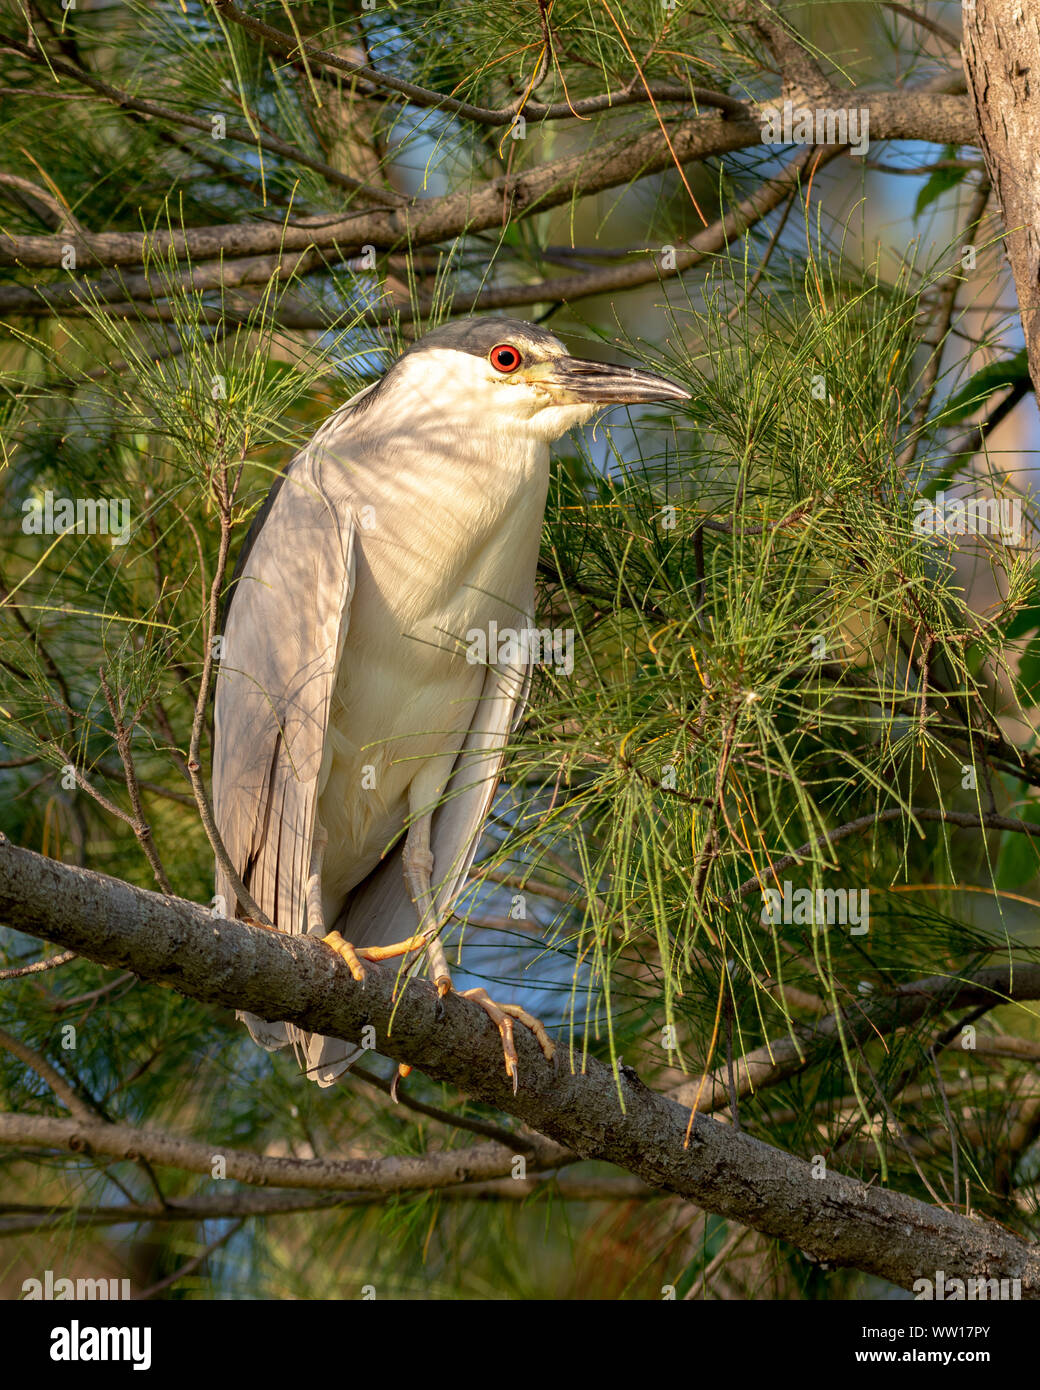 Black crowned night heron perched on a branch Stock Photo